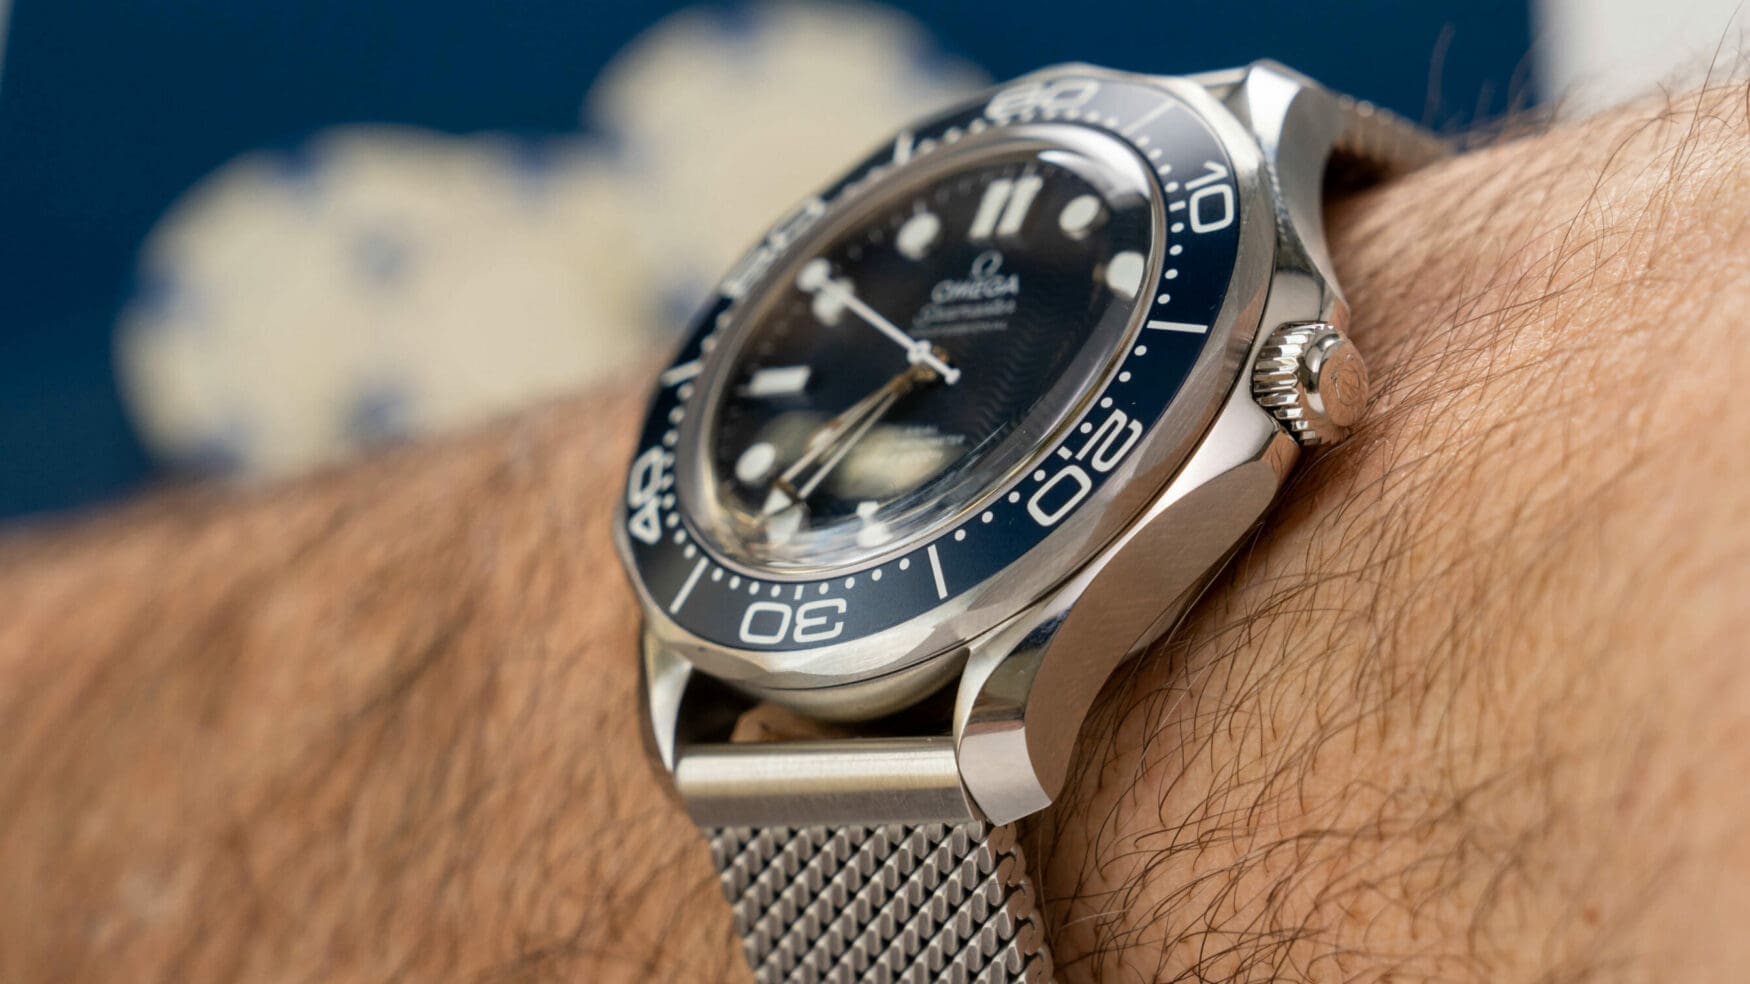 Case thickness dictates the difference between a good watch design and a great one